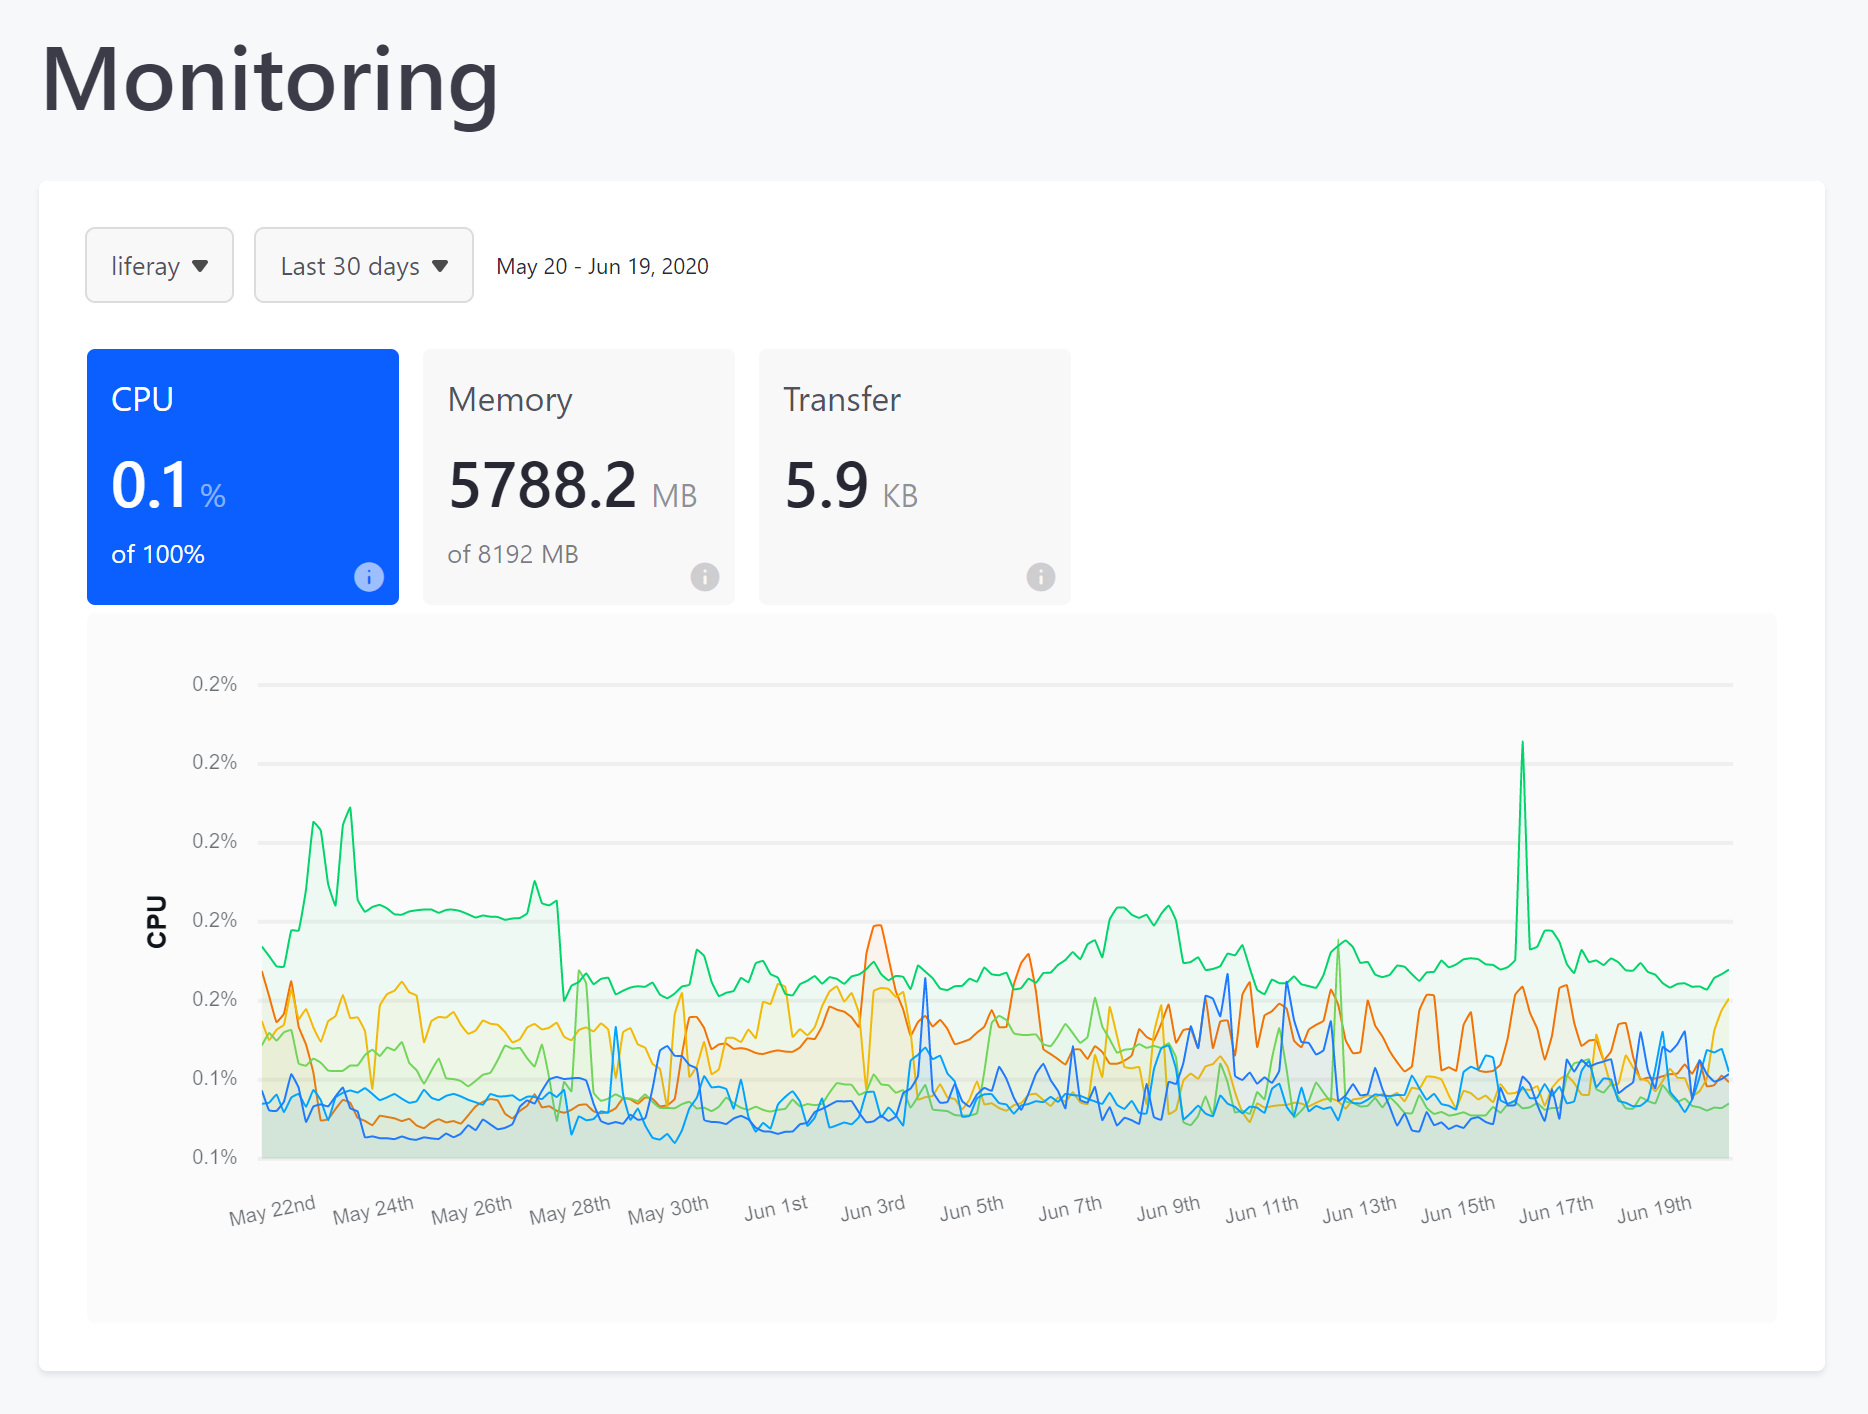 You can use Liferay Cloud to monitor your services.